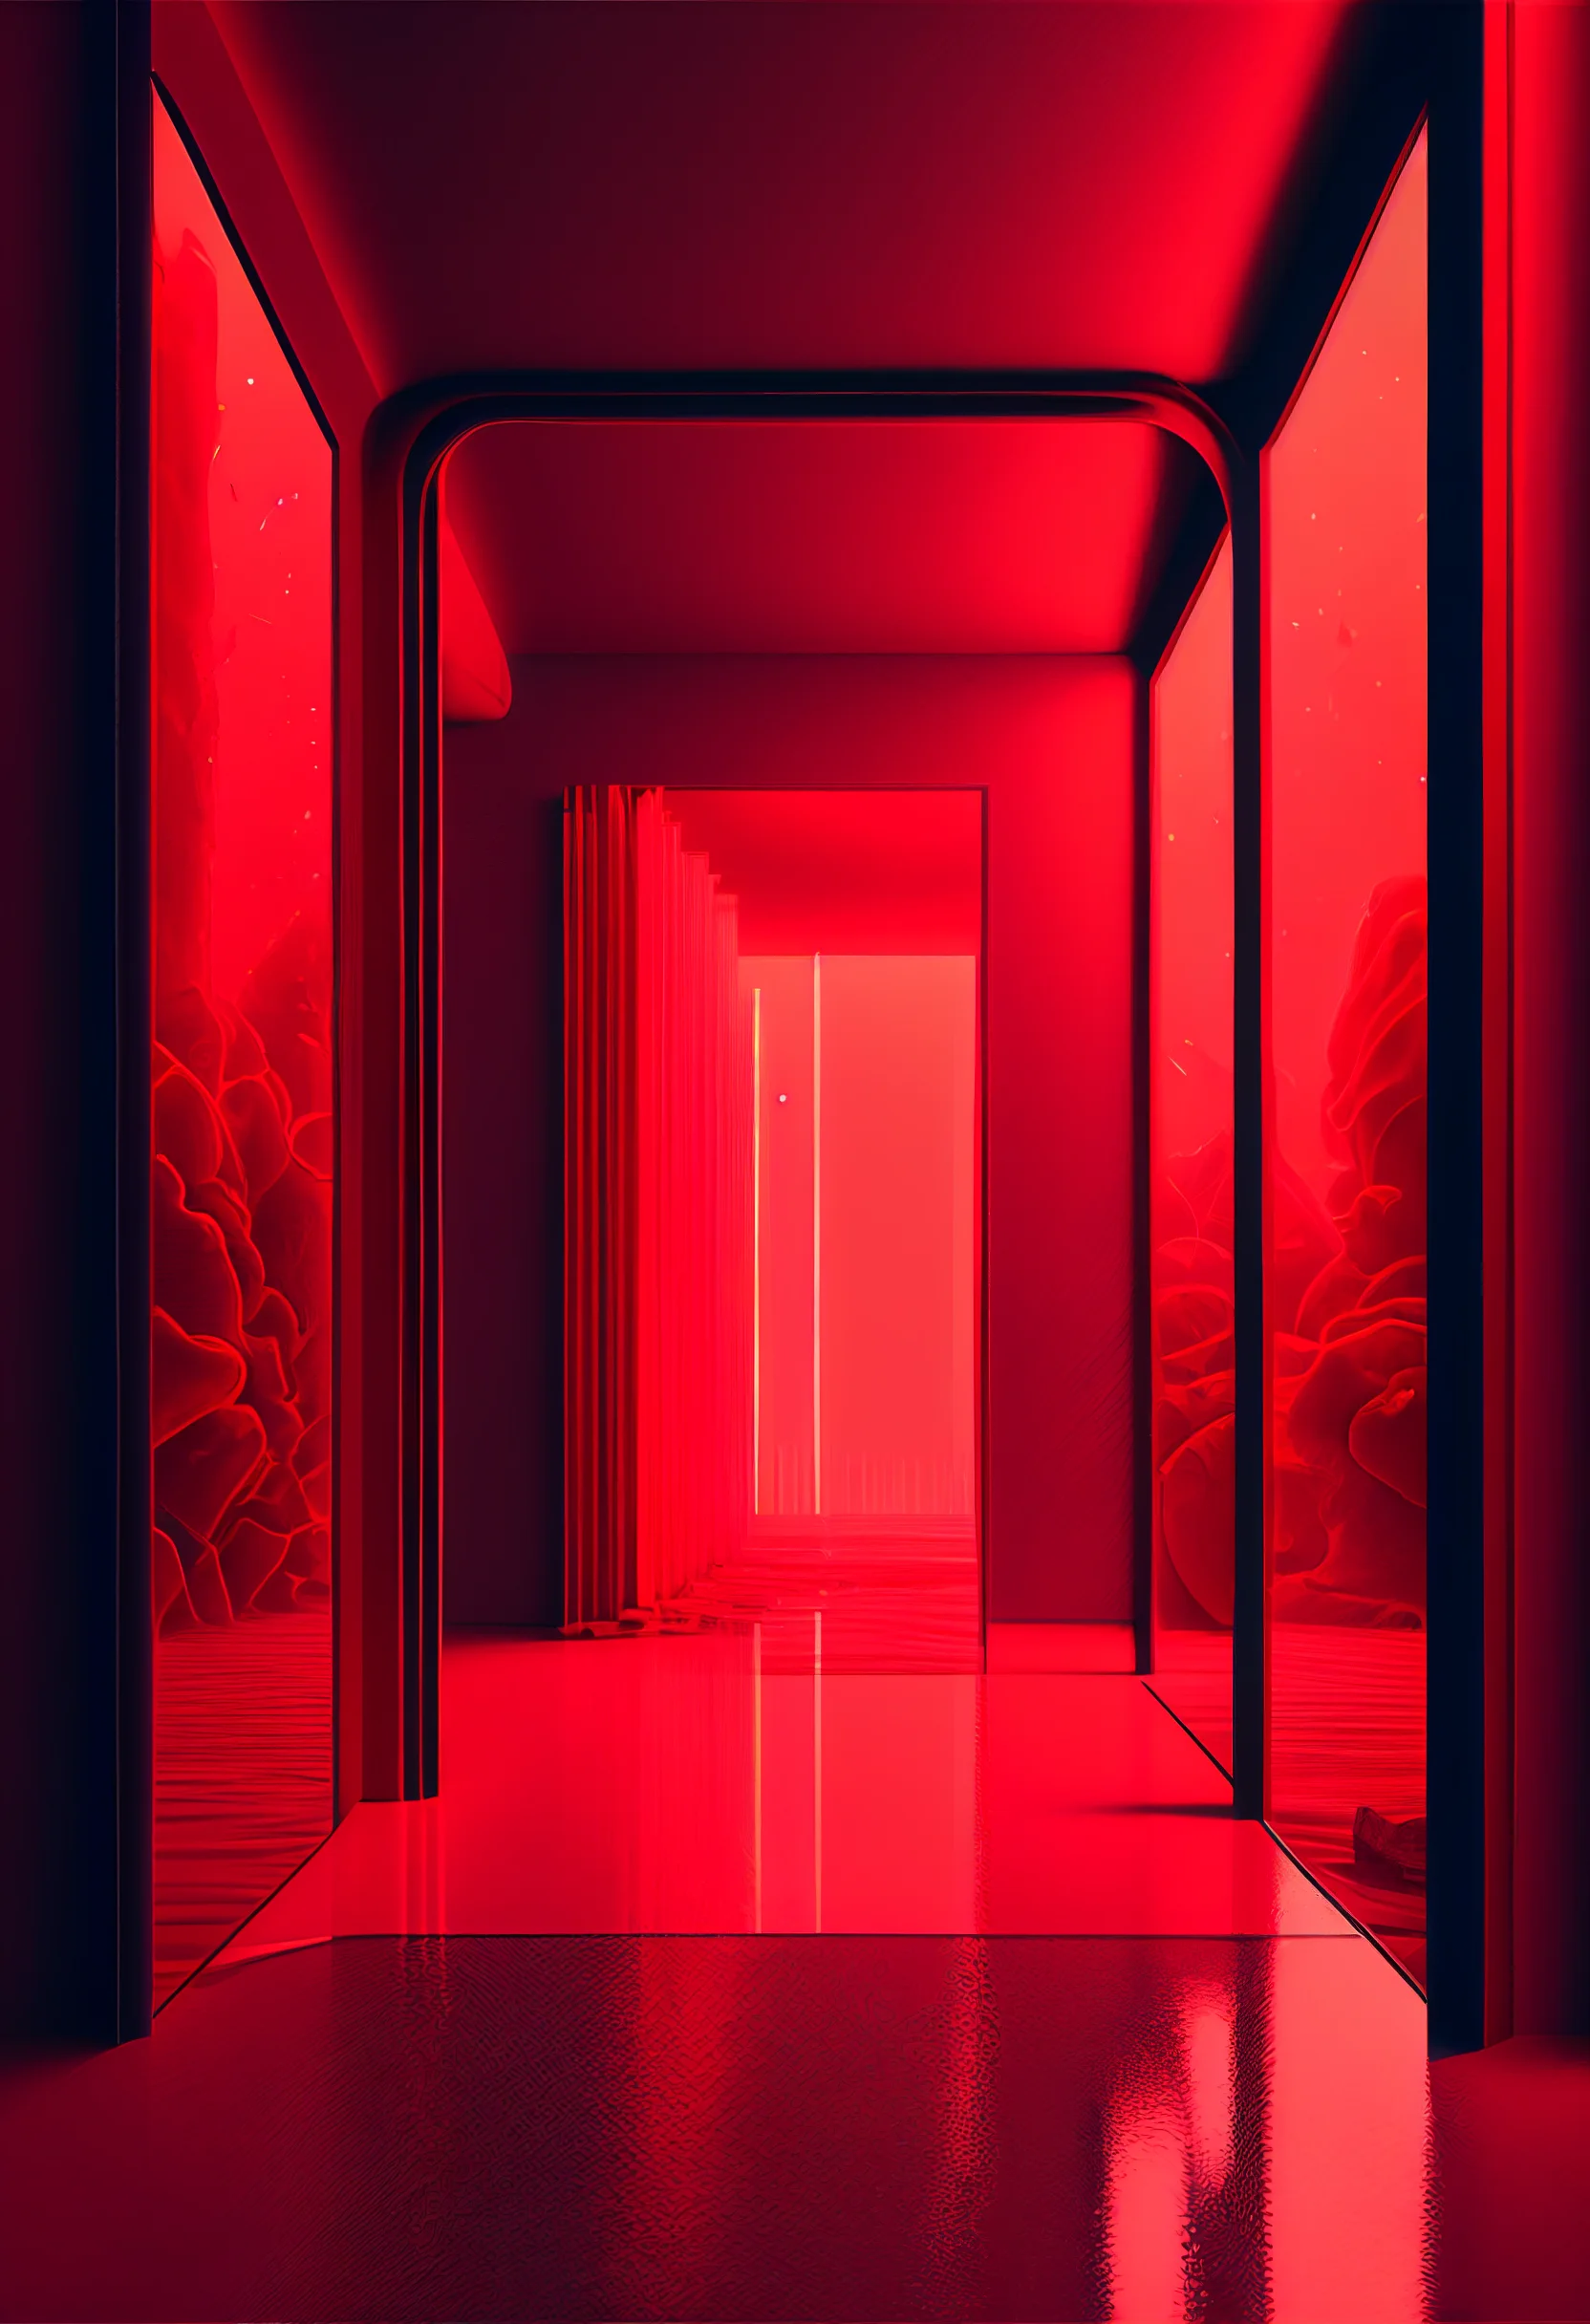 A hallway with red walls and floors - Light red